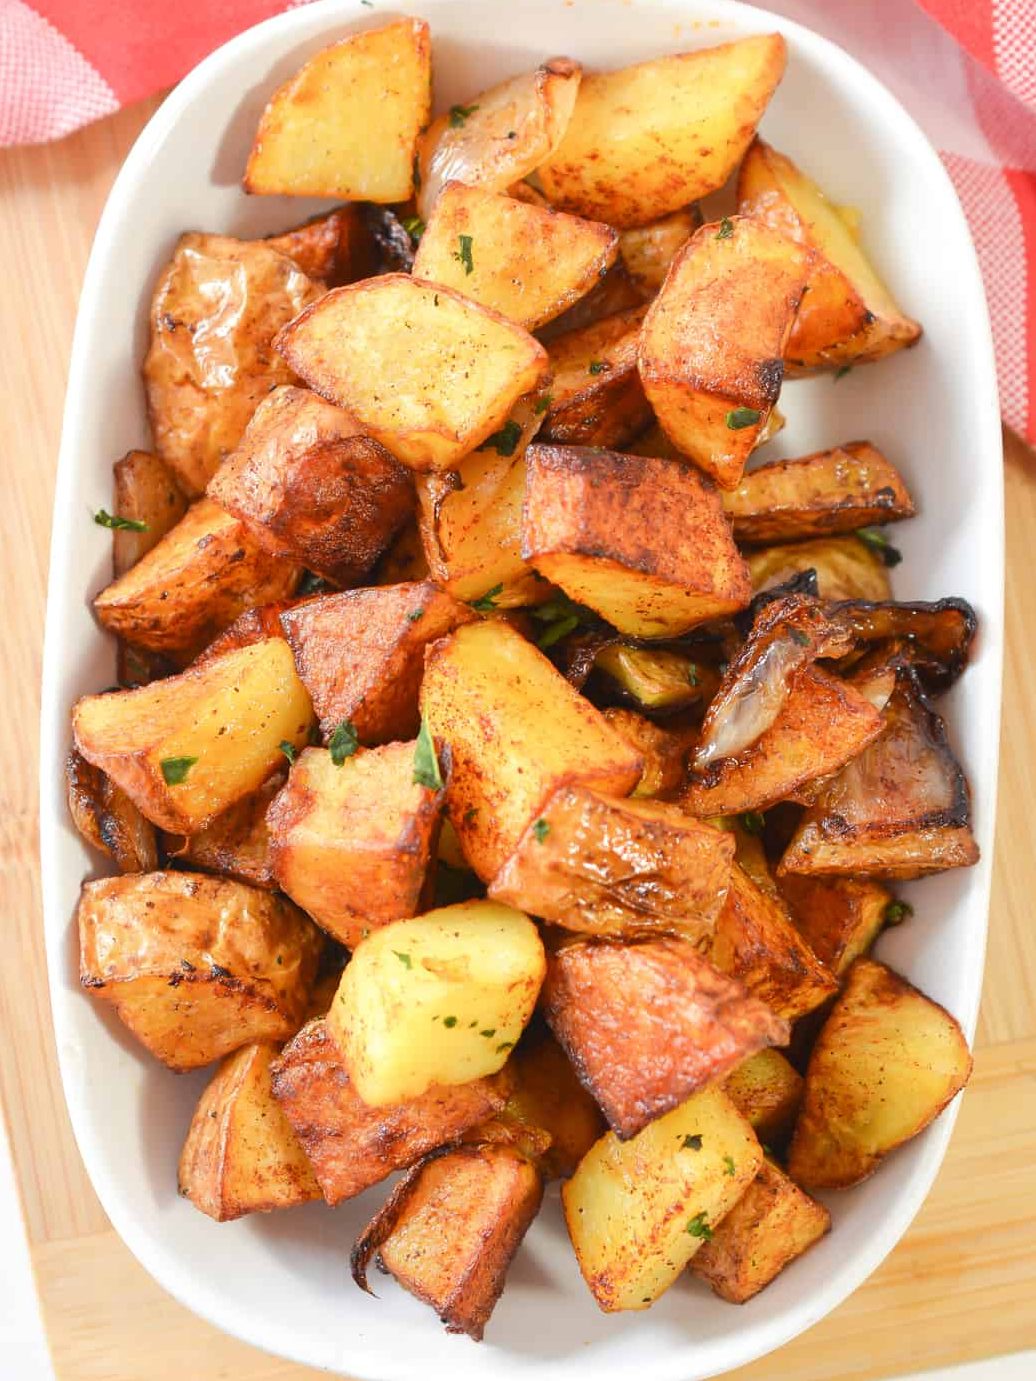 Fried Potatoes and Onions